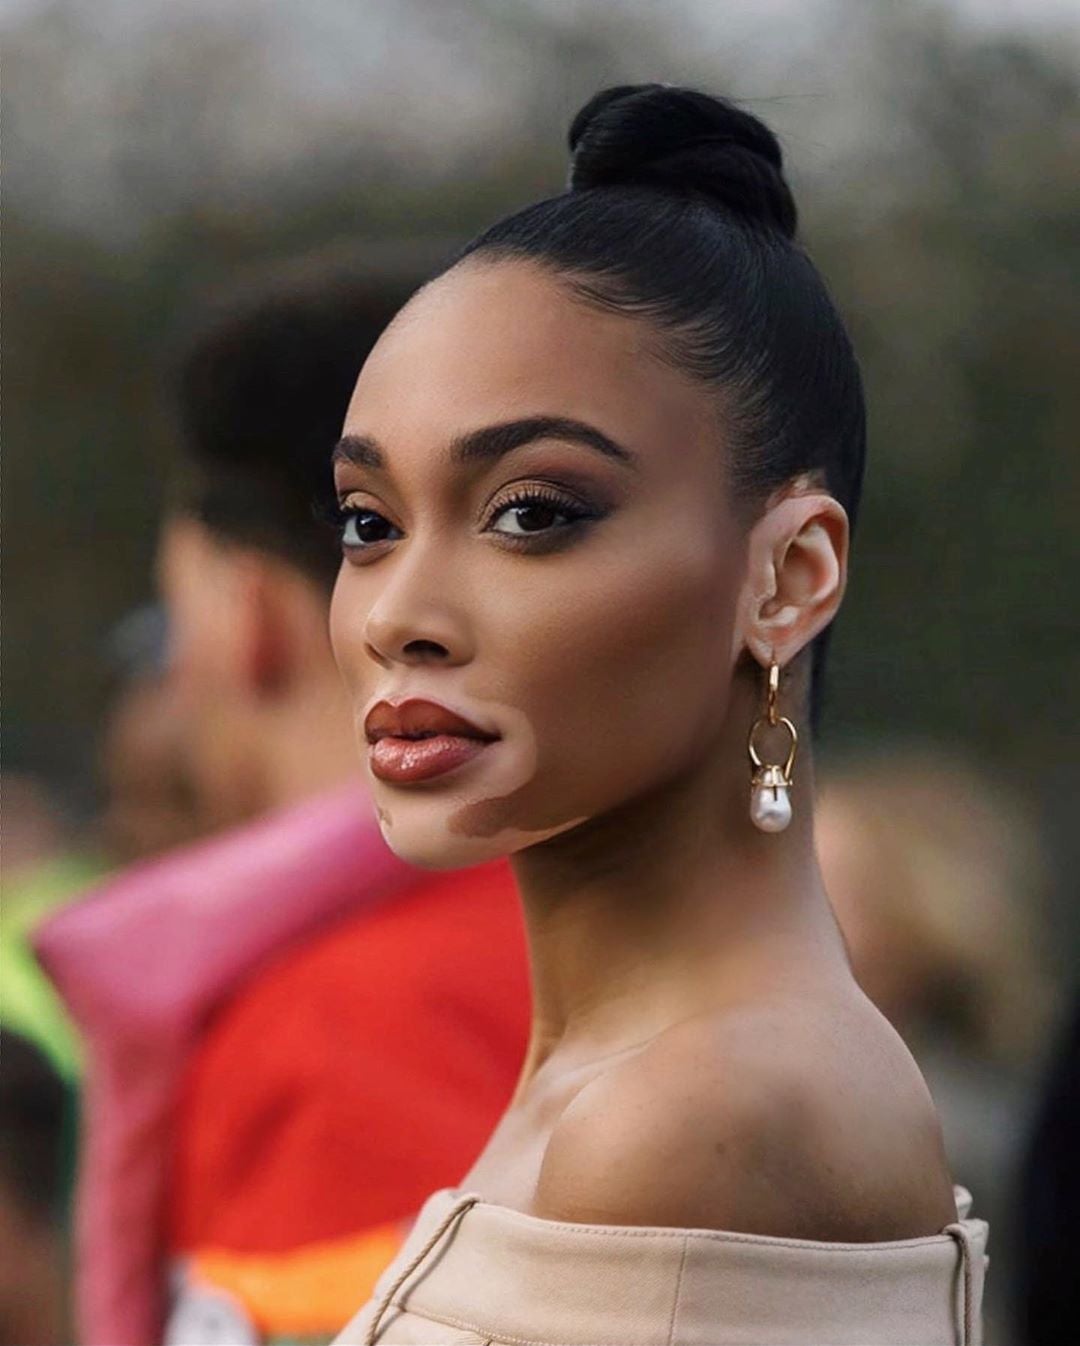 Eve, Saweetie, Joan Smalls And Other Celebrities Whose Beauty Slayed The Week